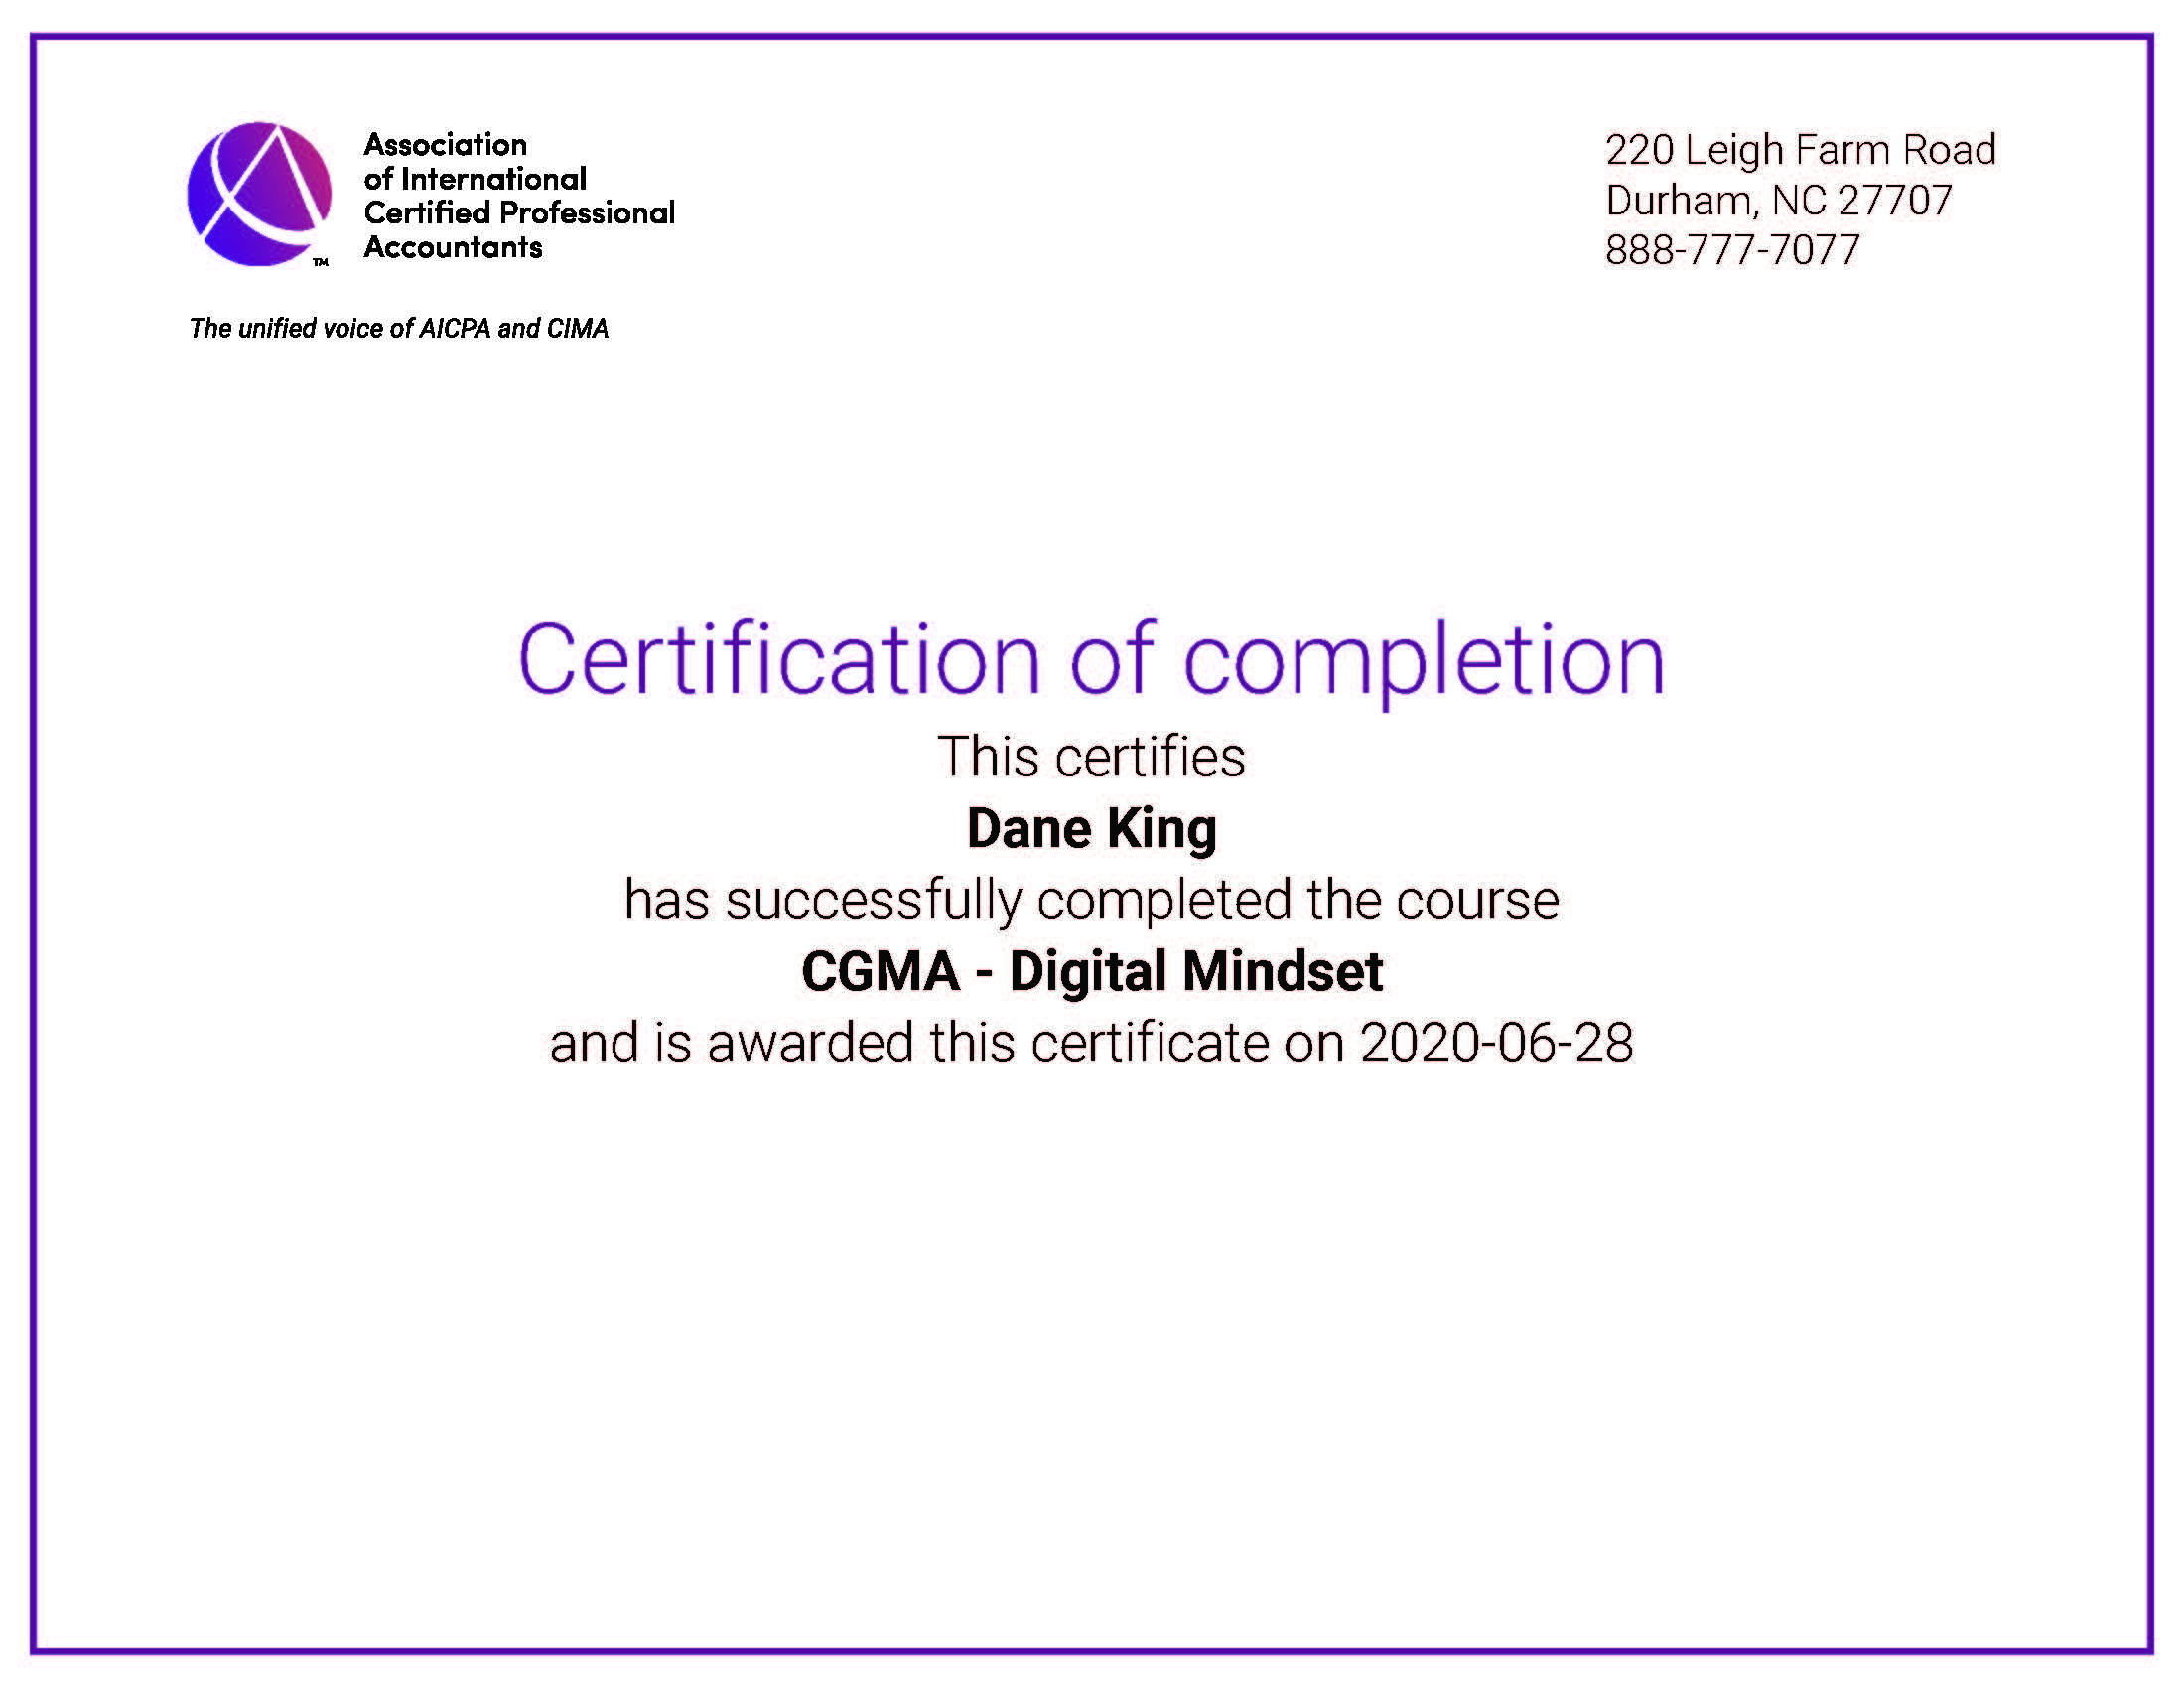 Dane King completes Digital Mindset Course from AICPA and CIMA